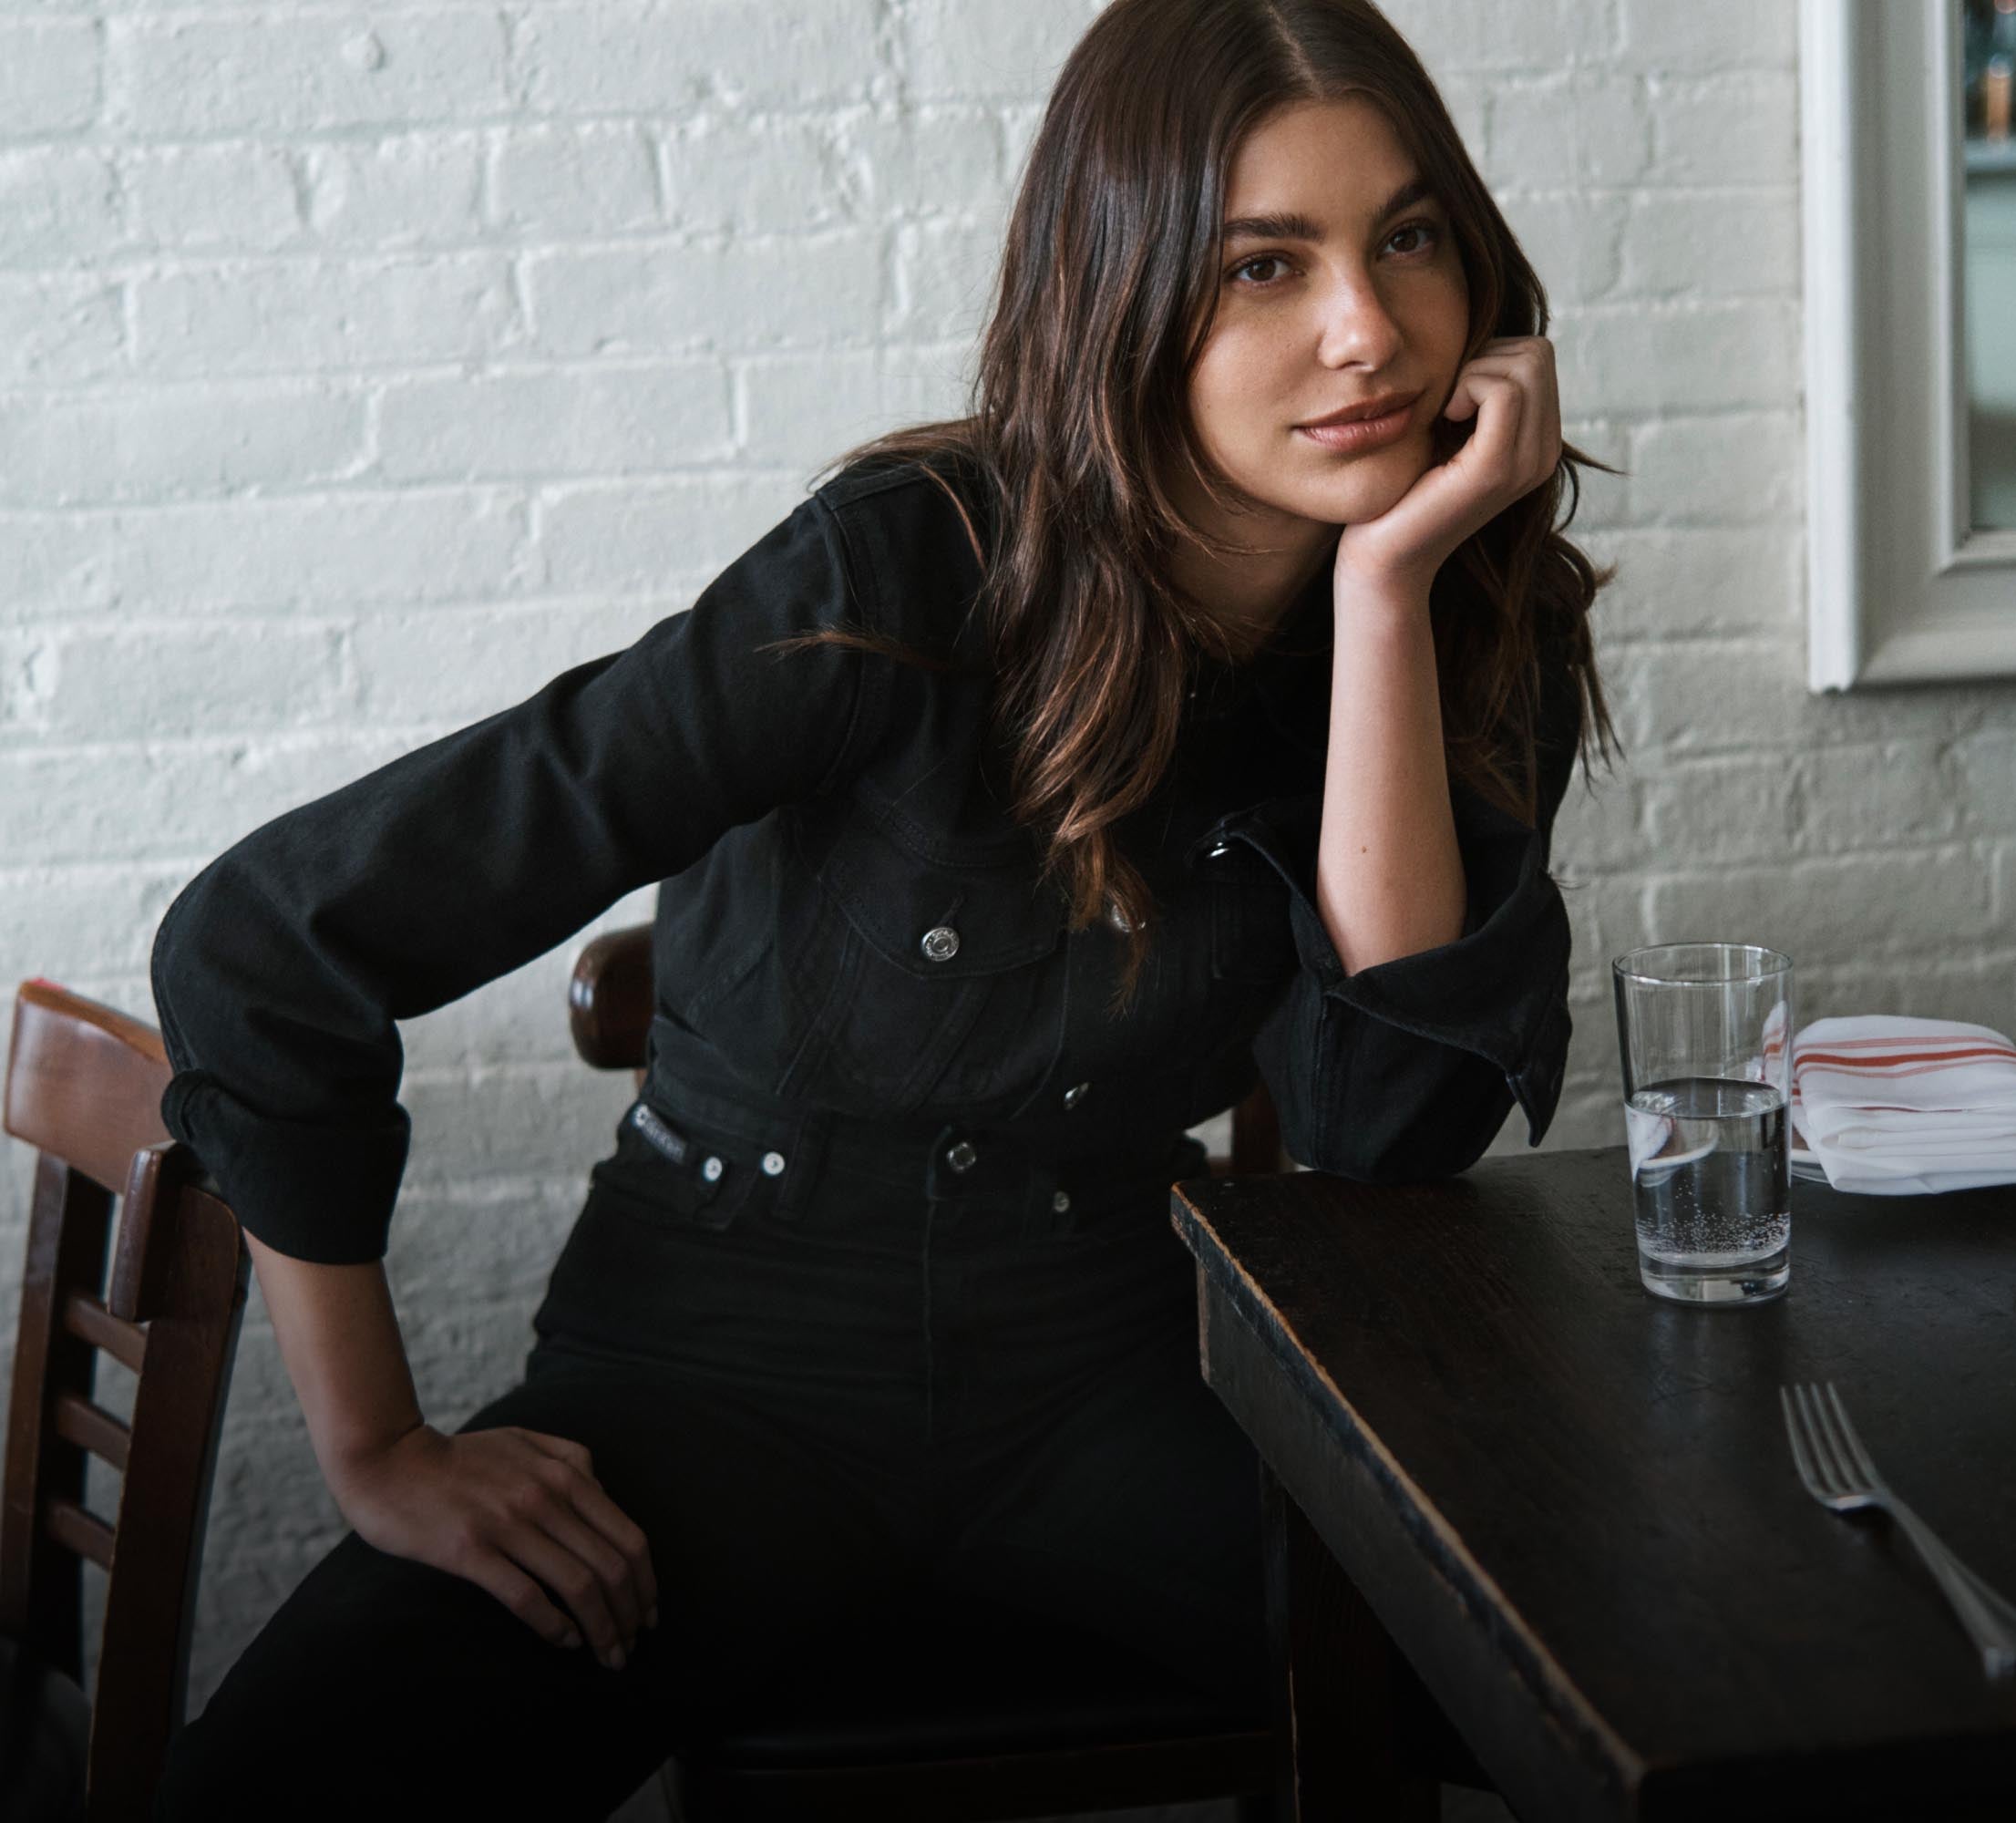 Camila Marrone leaning on a table wearing a matching dark blue denim shirt and denim jeans